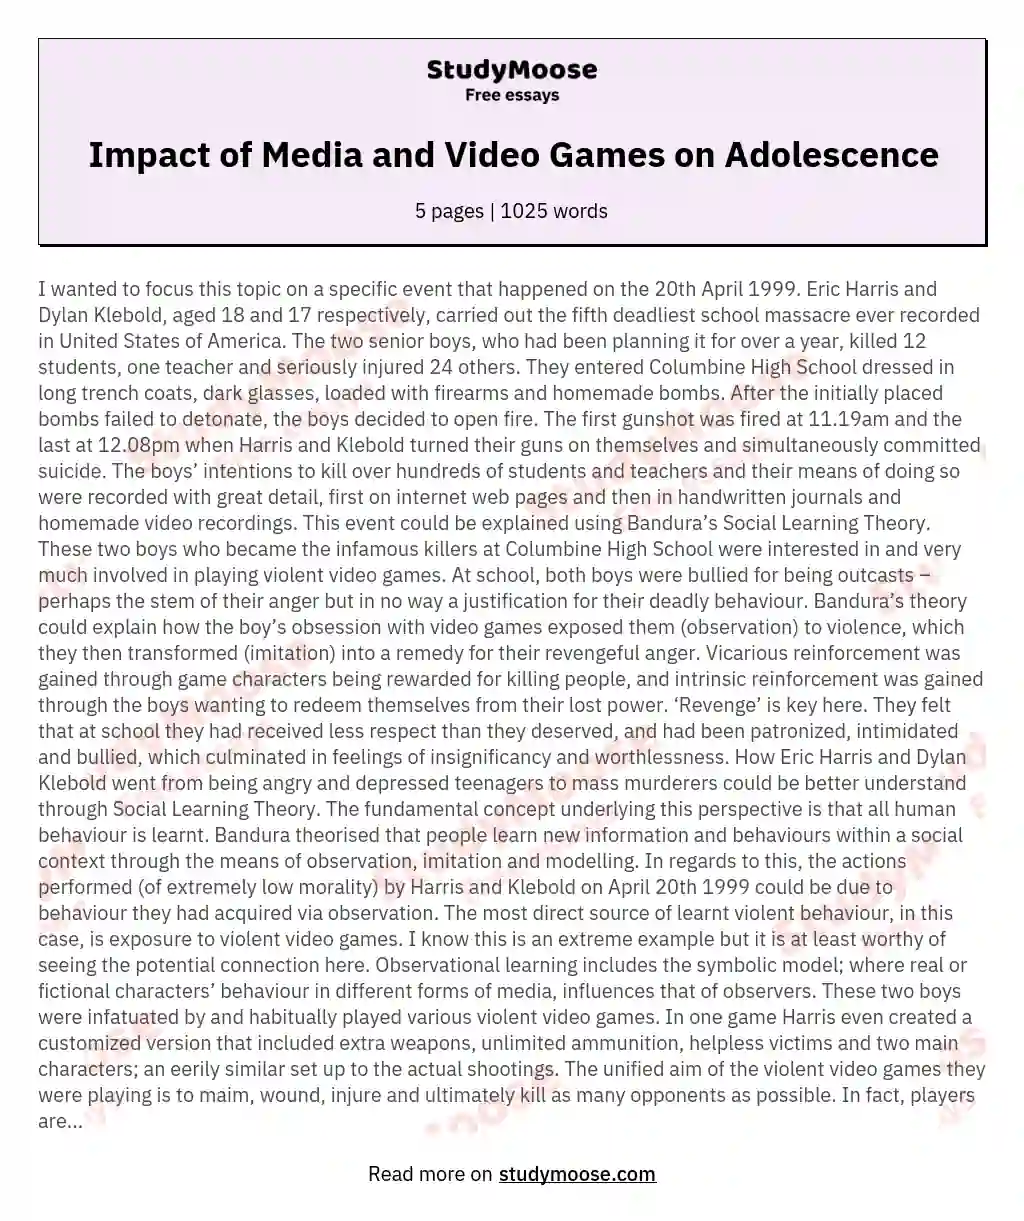 Impact of Media and Video Games on Adolescence essay